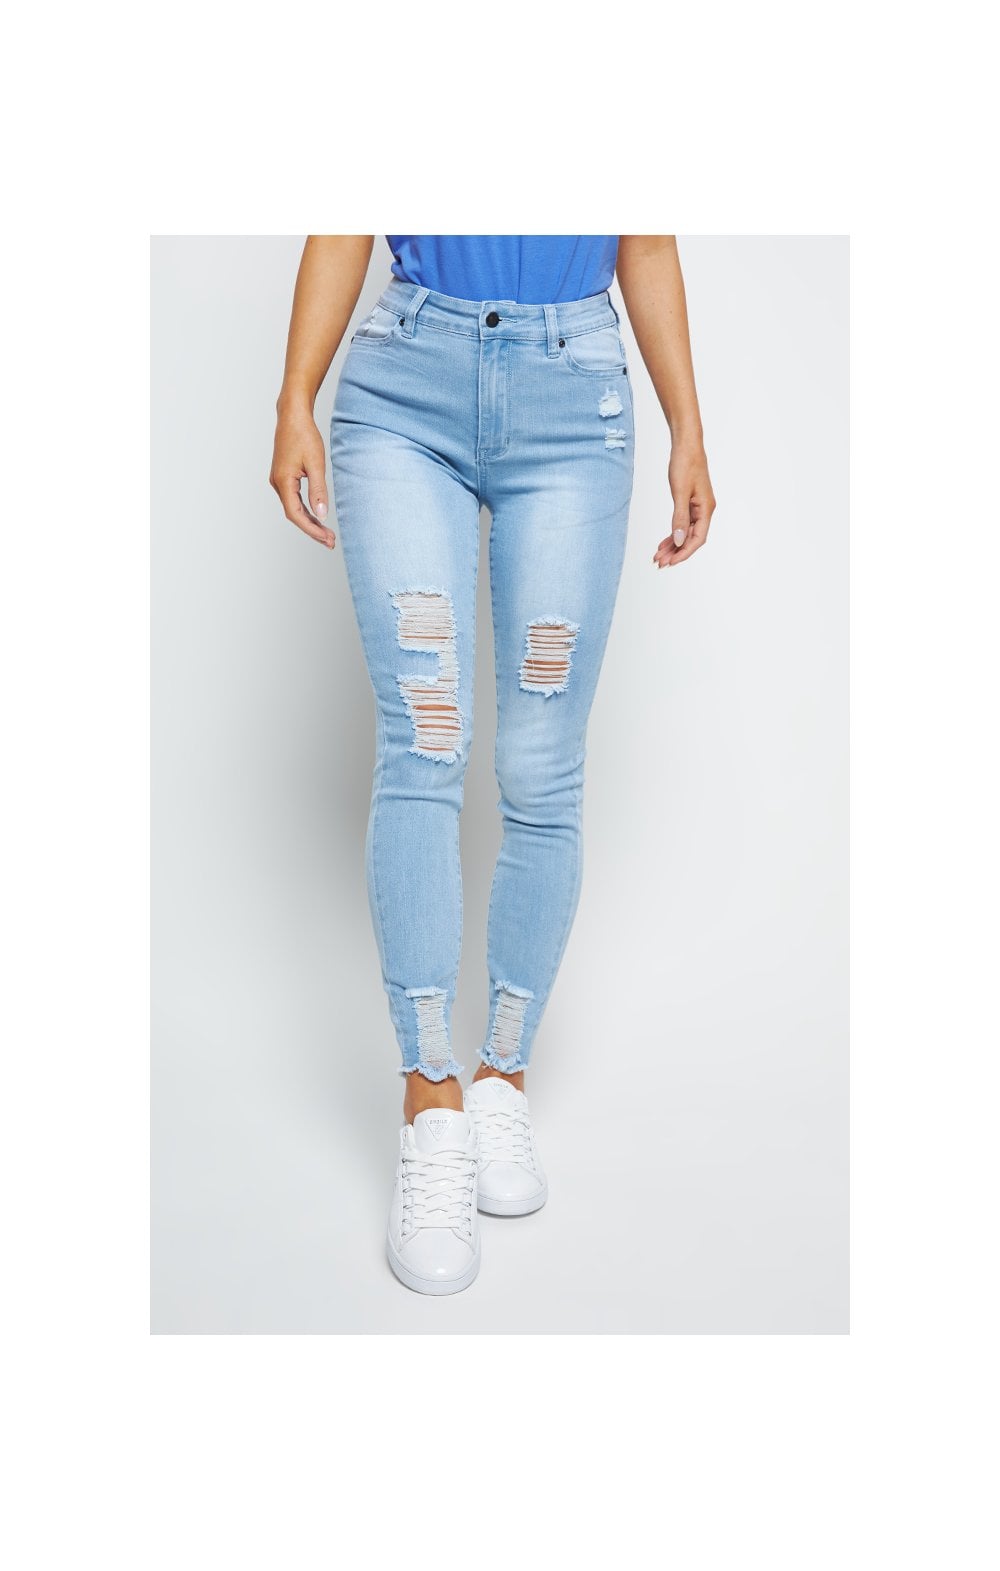 Load image into Gallery viewer, SikSilk Distressed Skinny Jeans - Ice Blue (1)